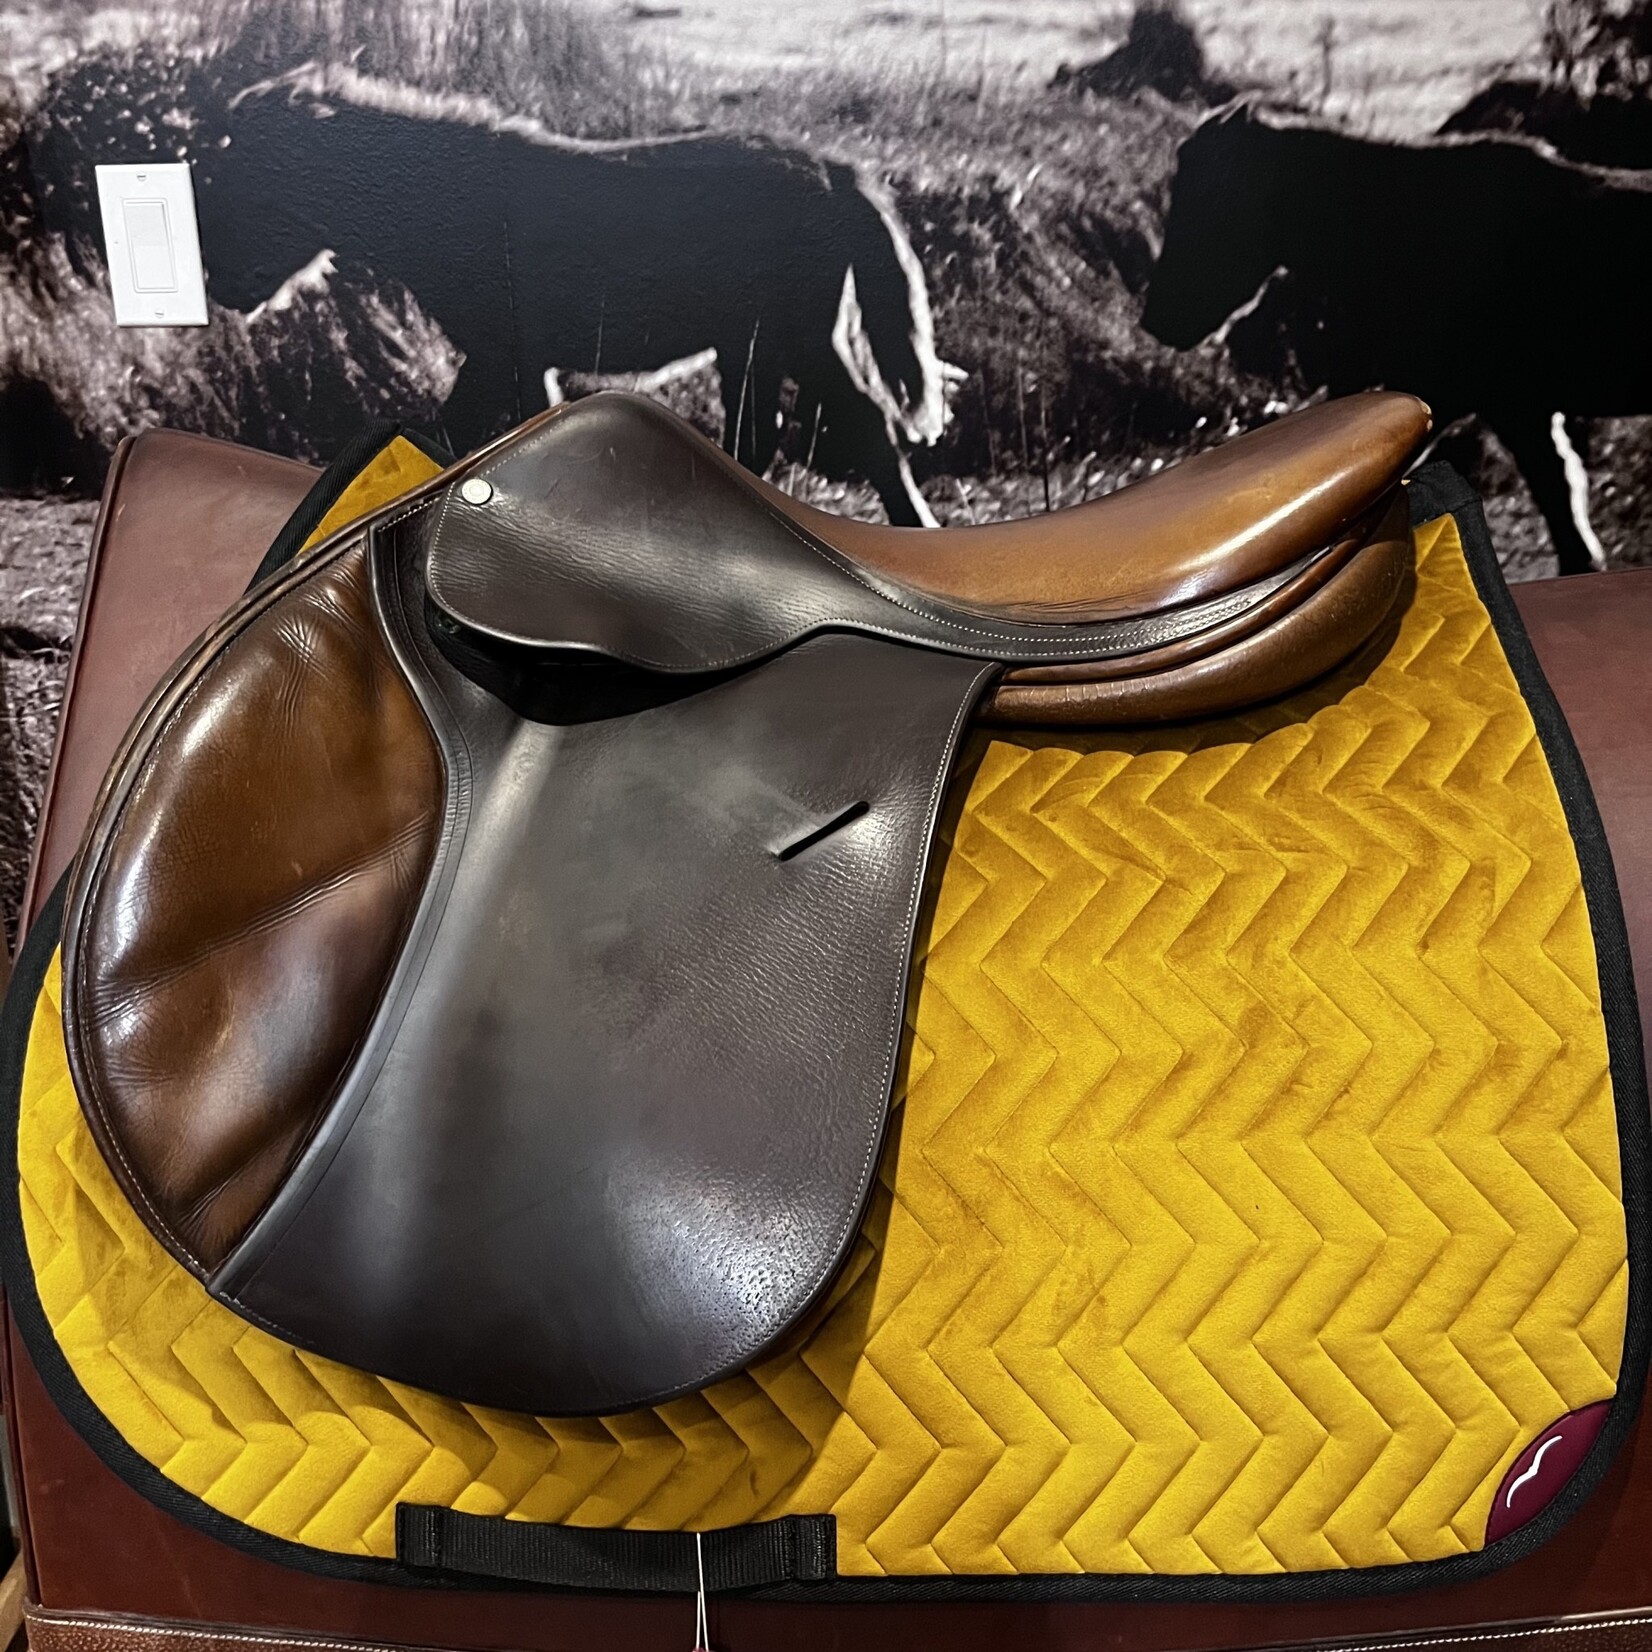 #2993 93 Consigned Butet Jumping Saddle Grained, P (Flat Seat) 2 Flap 18" Gold STD TREE, included cover